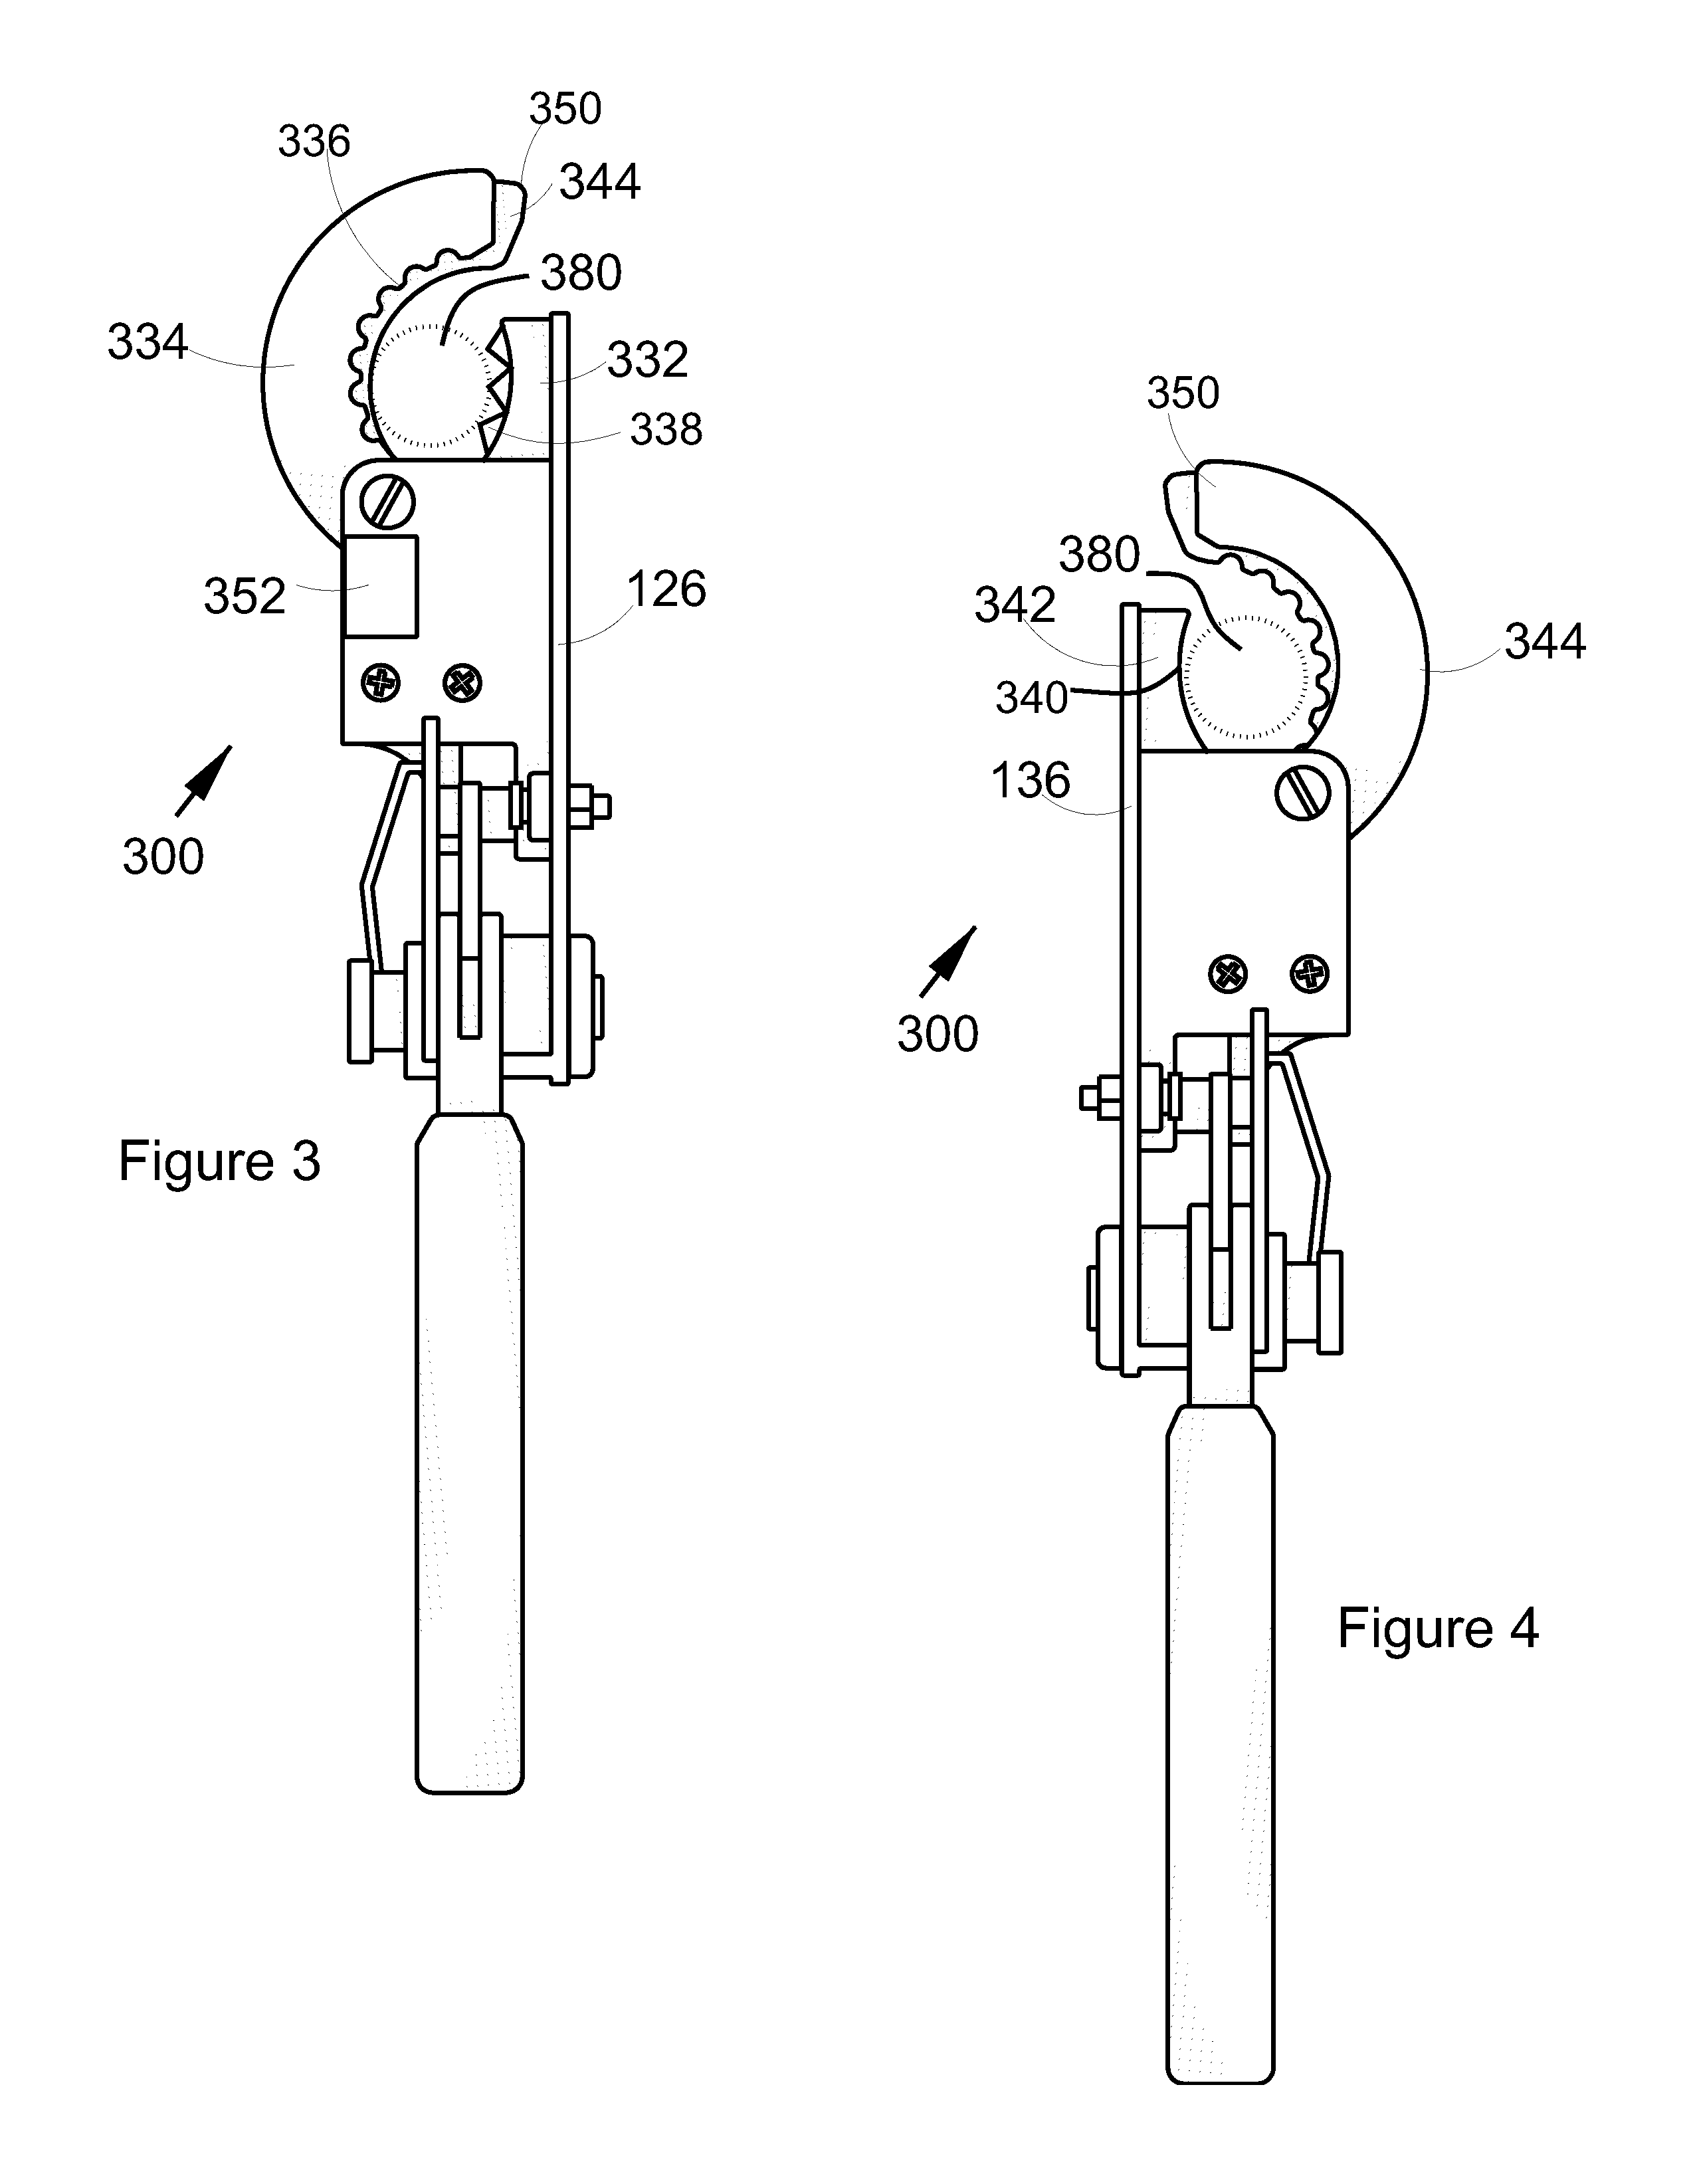 Hand tool for use in the quick disconnection of quick connect/disconnect couplings